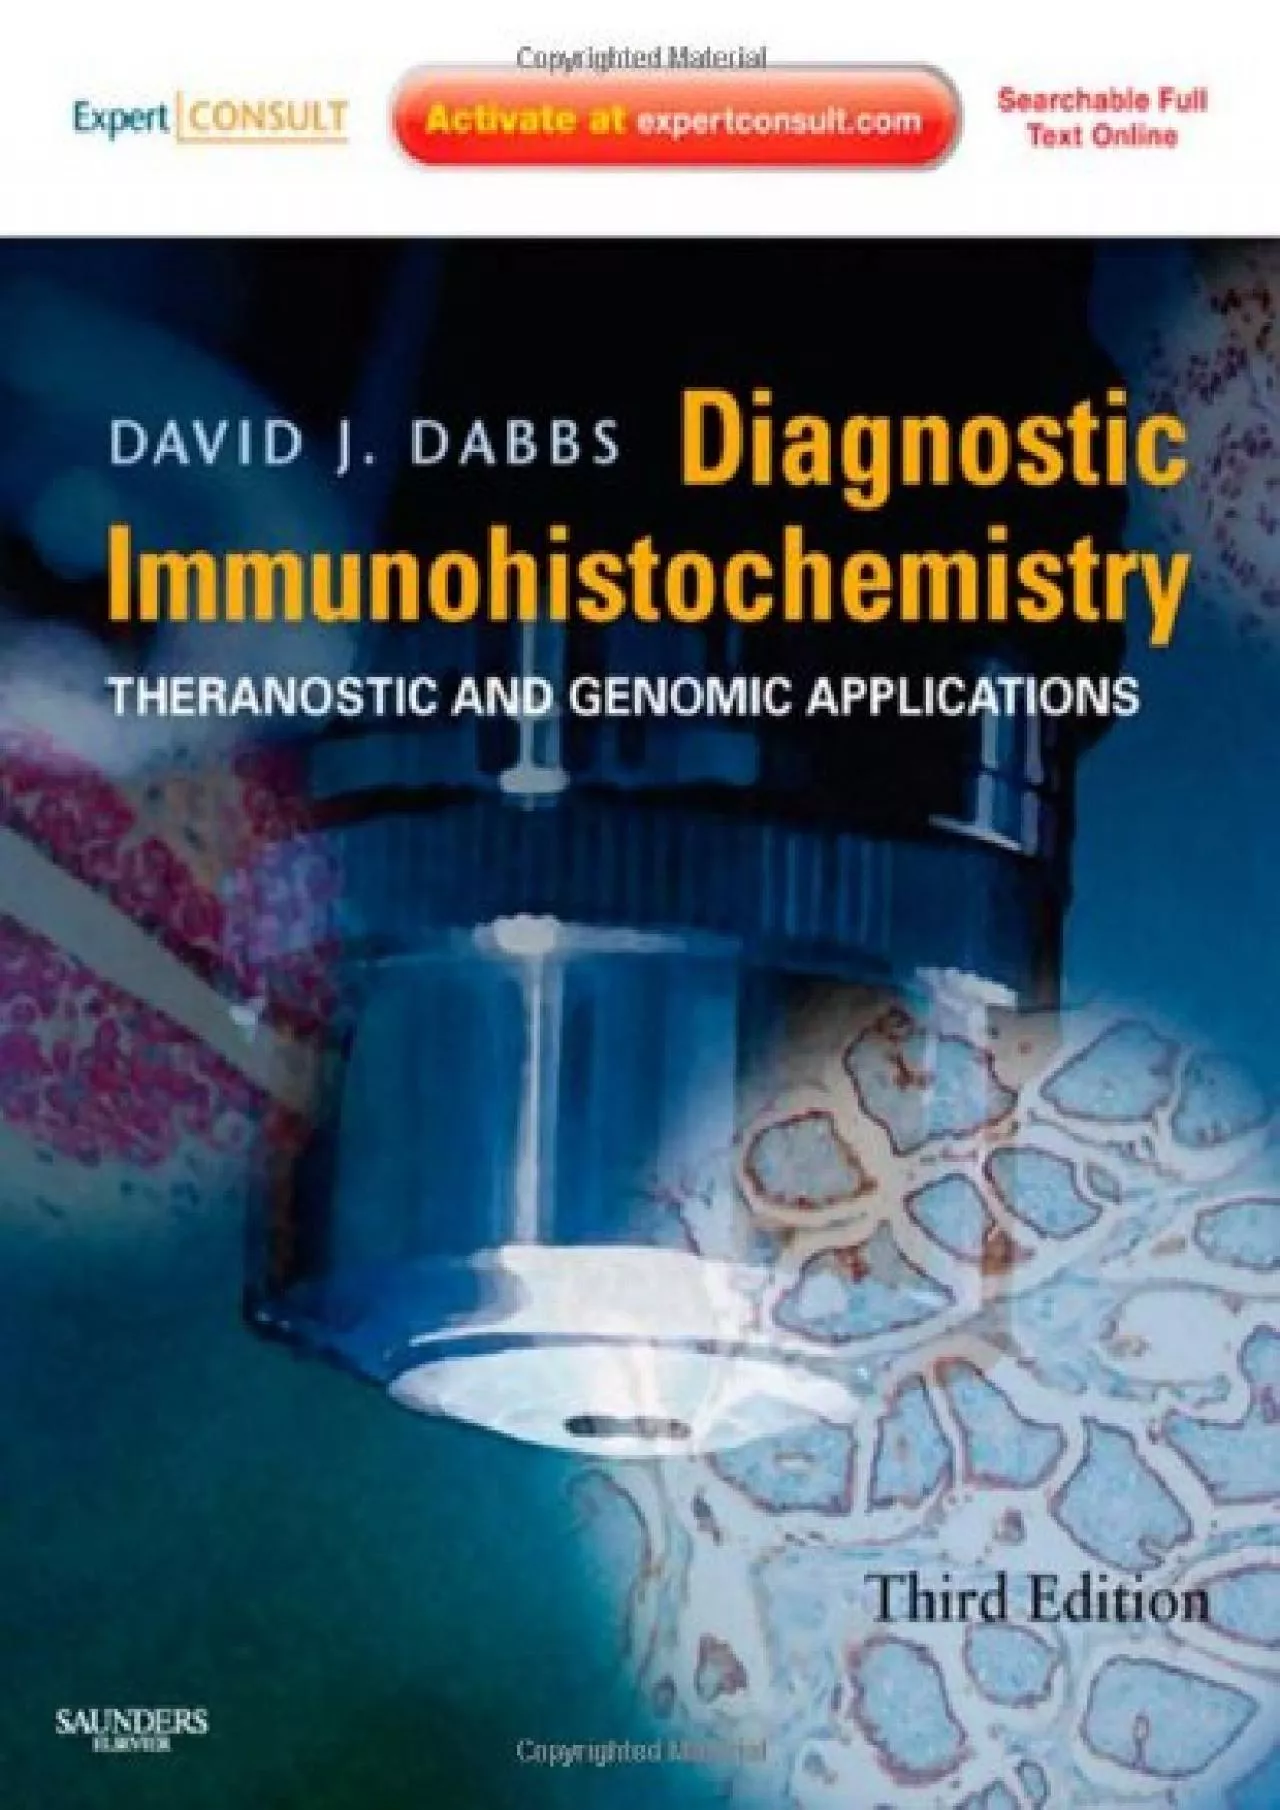 (BOOK)-Diagnostic Immunohistochemistry: Theranostic and Genomic Applications, Expert Consult: